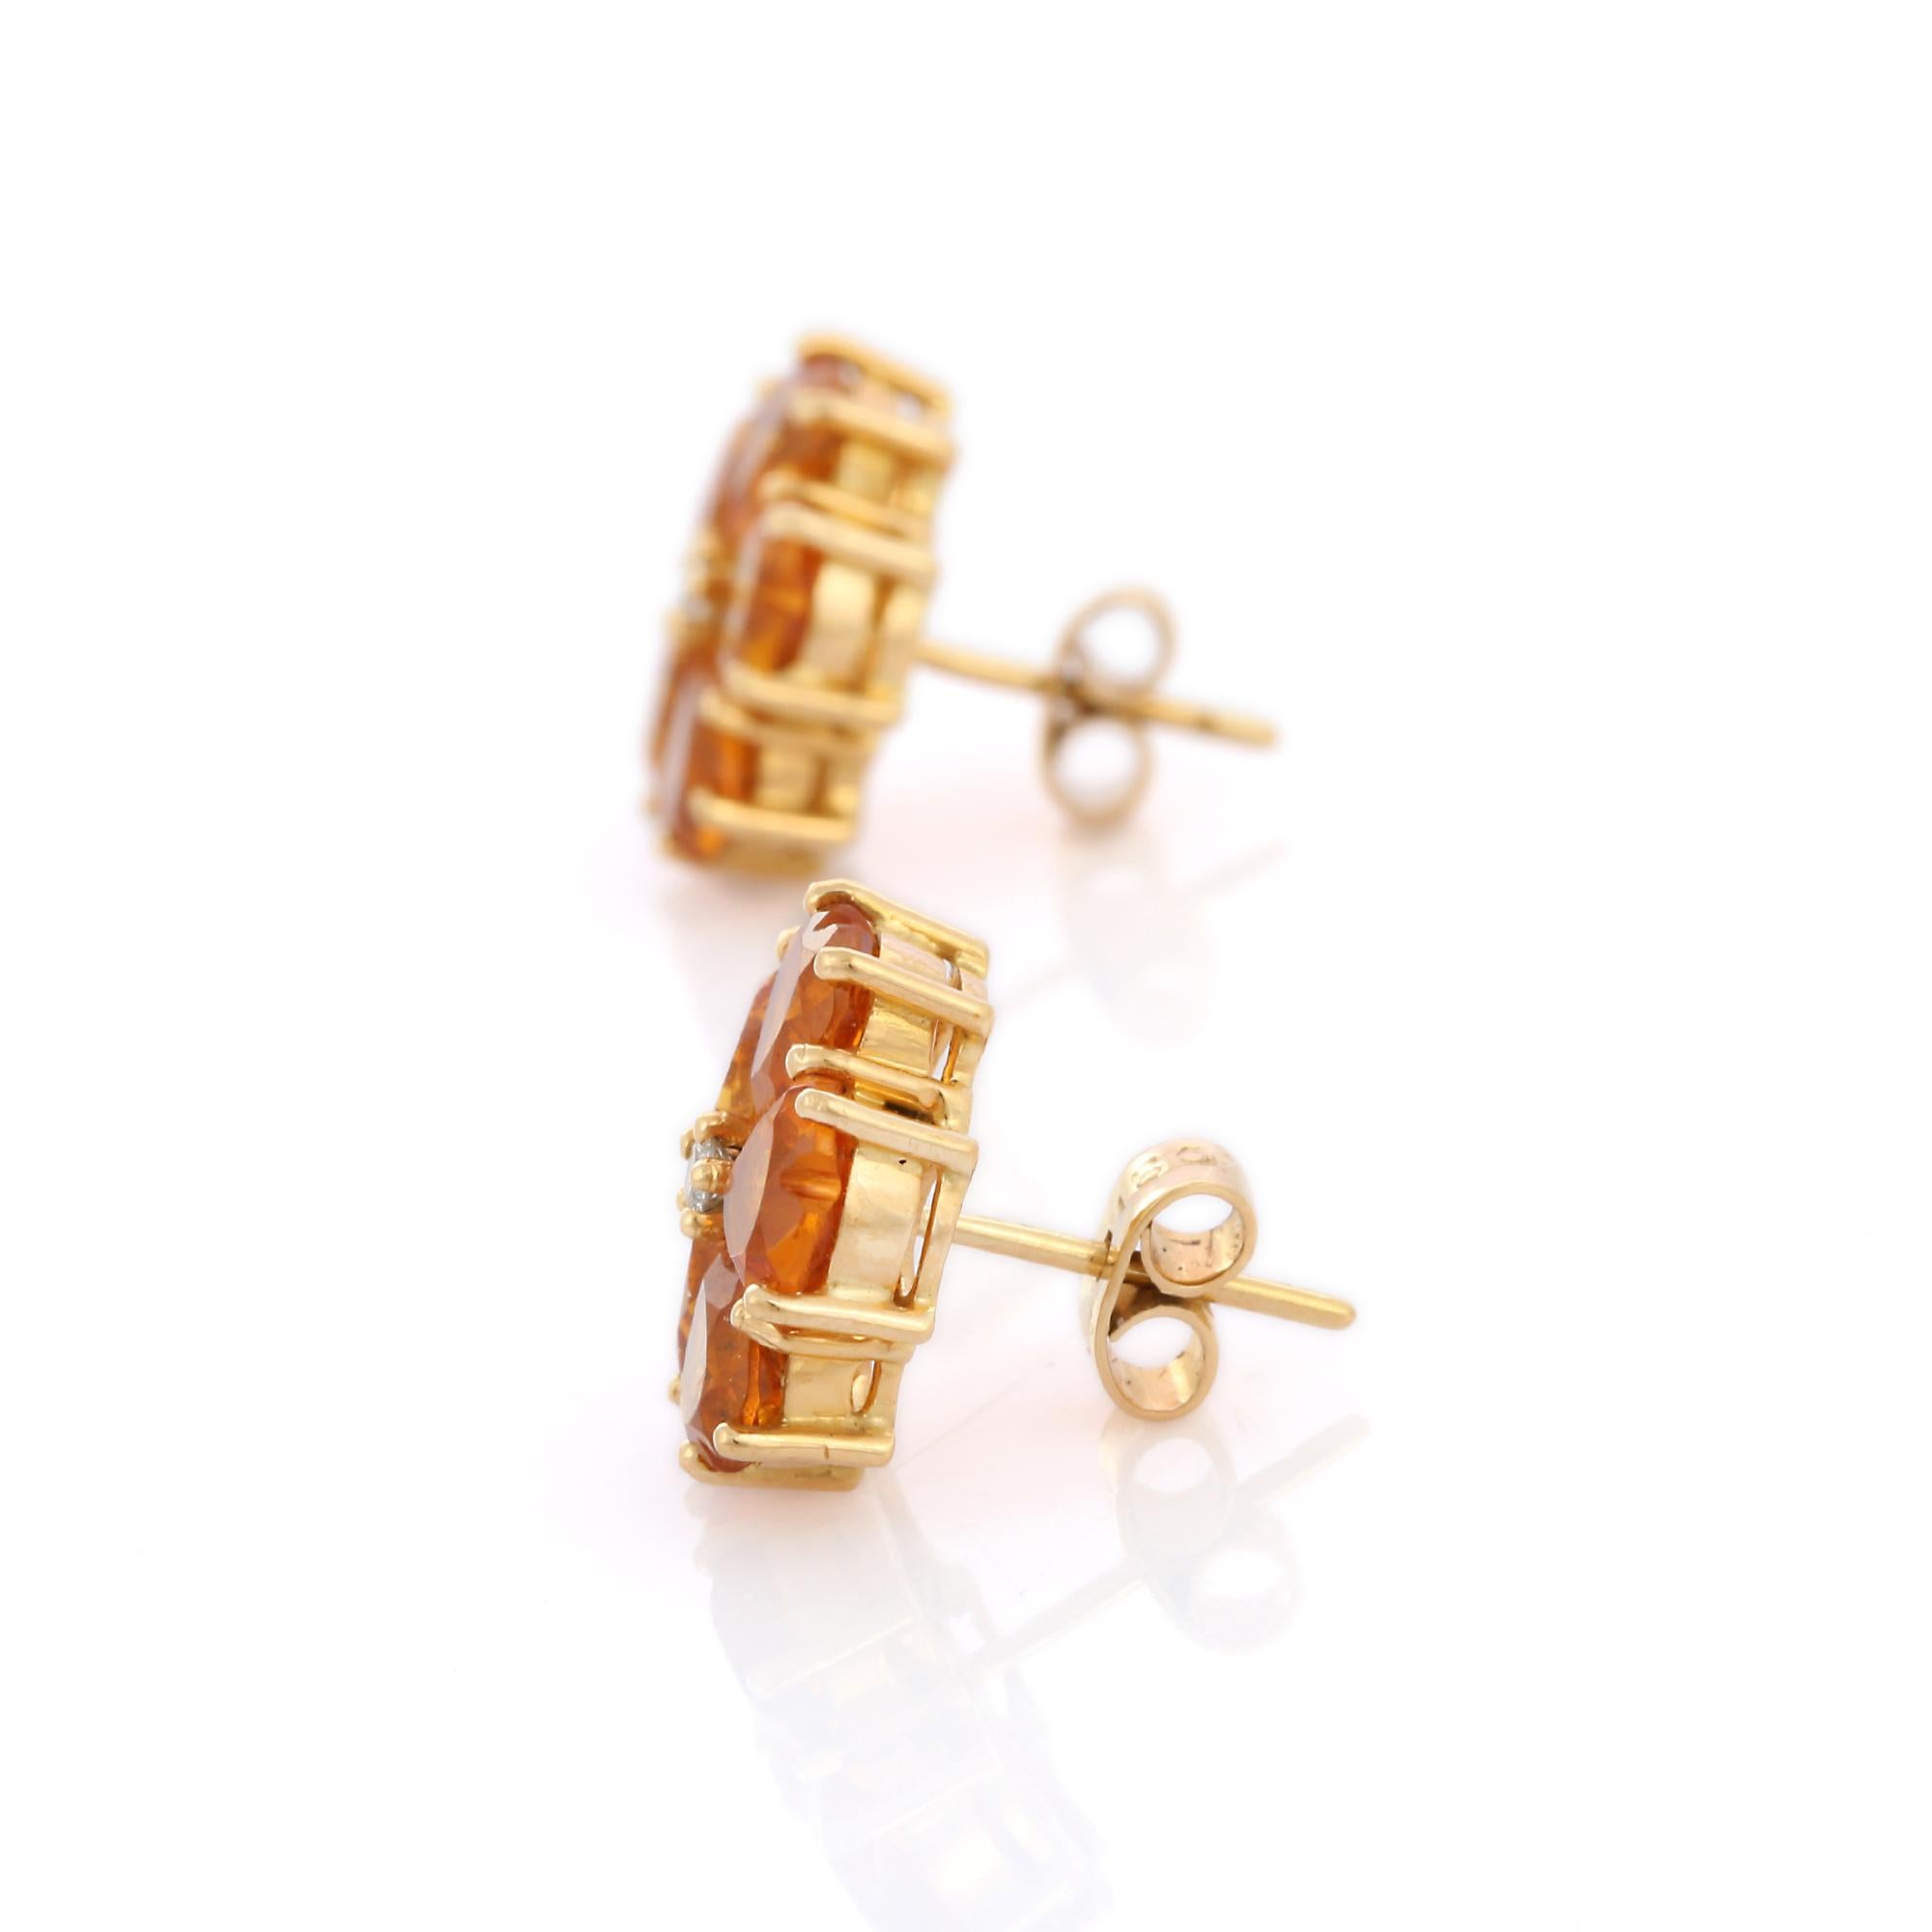 Studs create a subtle beauty while showcasing the colors of the natural precious gemstones and illuminating diamonds making a statement.

Heart cut citrine studs in 18K gold. Embrace your look with these stunning pair of earrings suitable for any